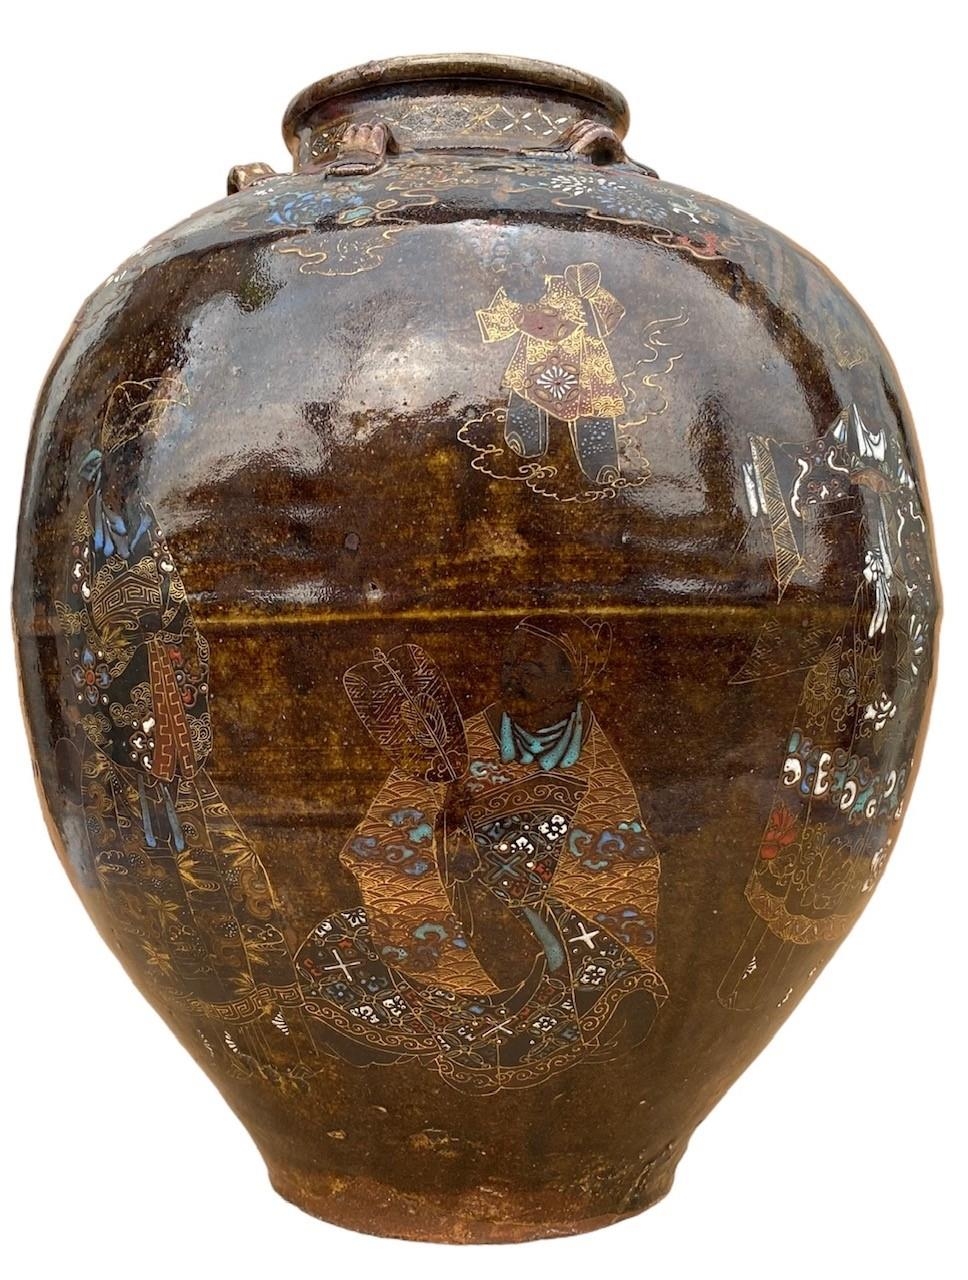 A LARGE 19TH CENTURY JAPANESE TEA JAR Decorated with painted enamel, gold figures and flowers, - Image 4 of 6